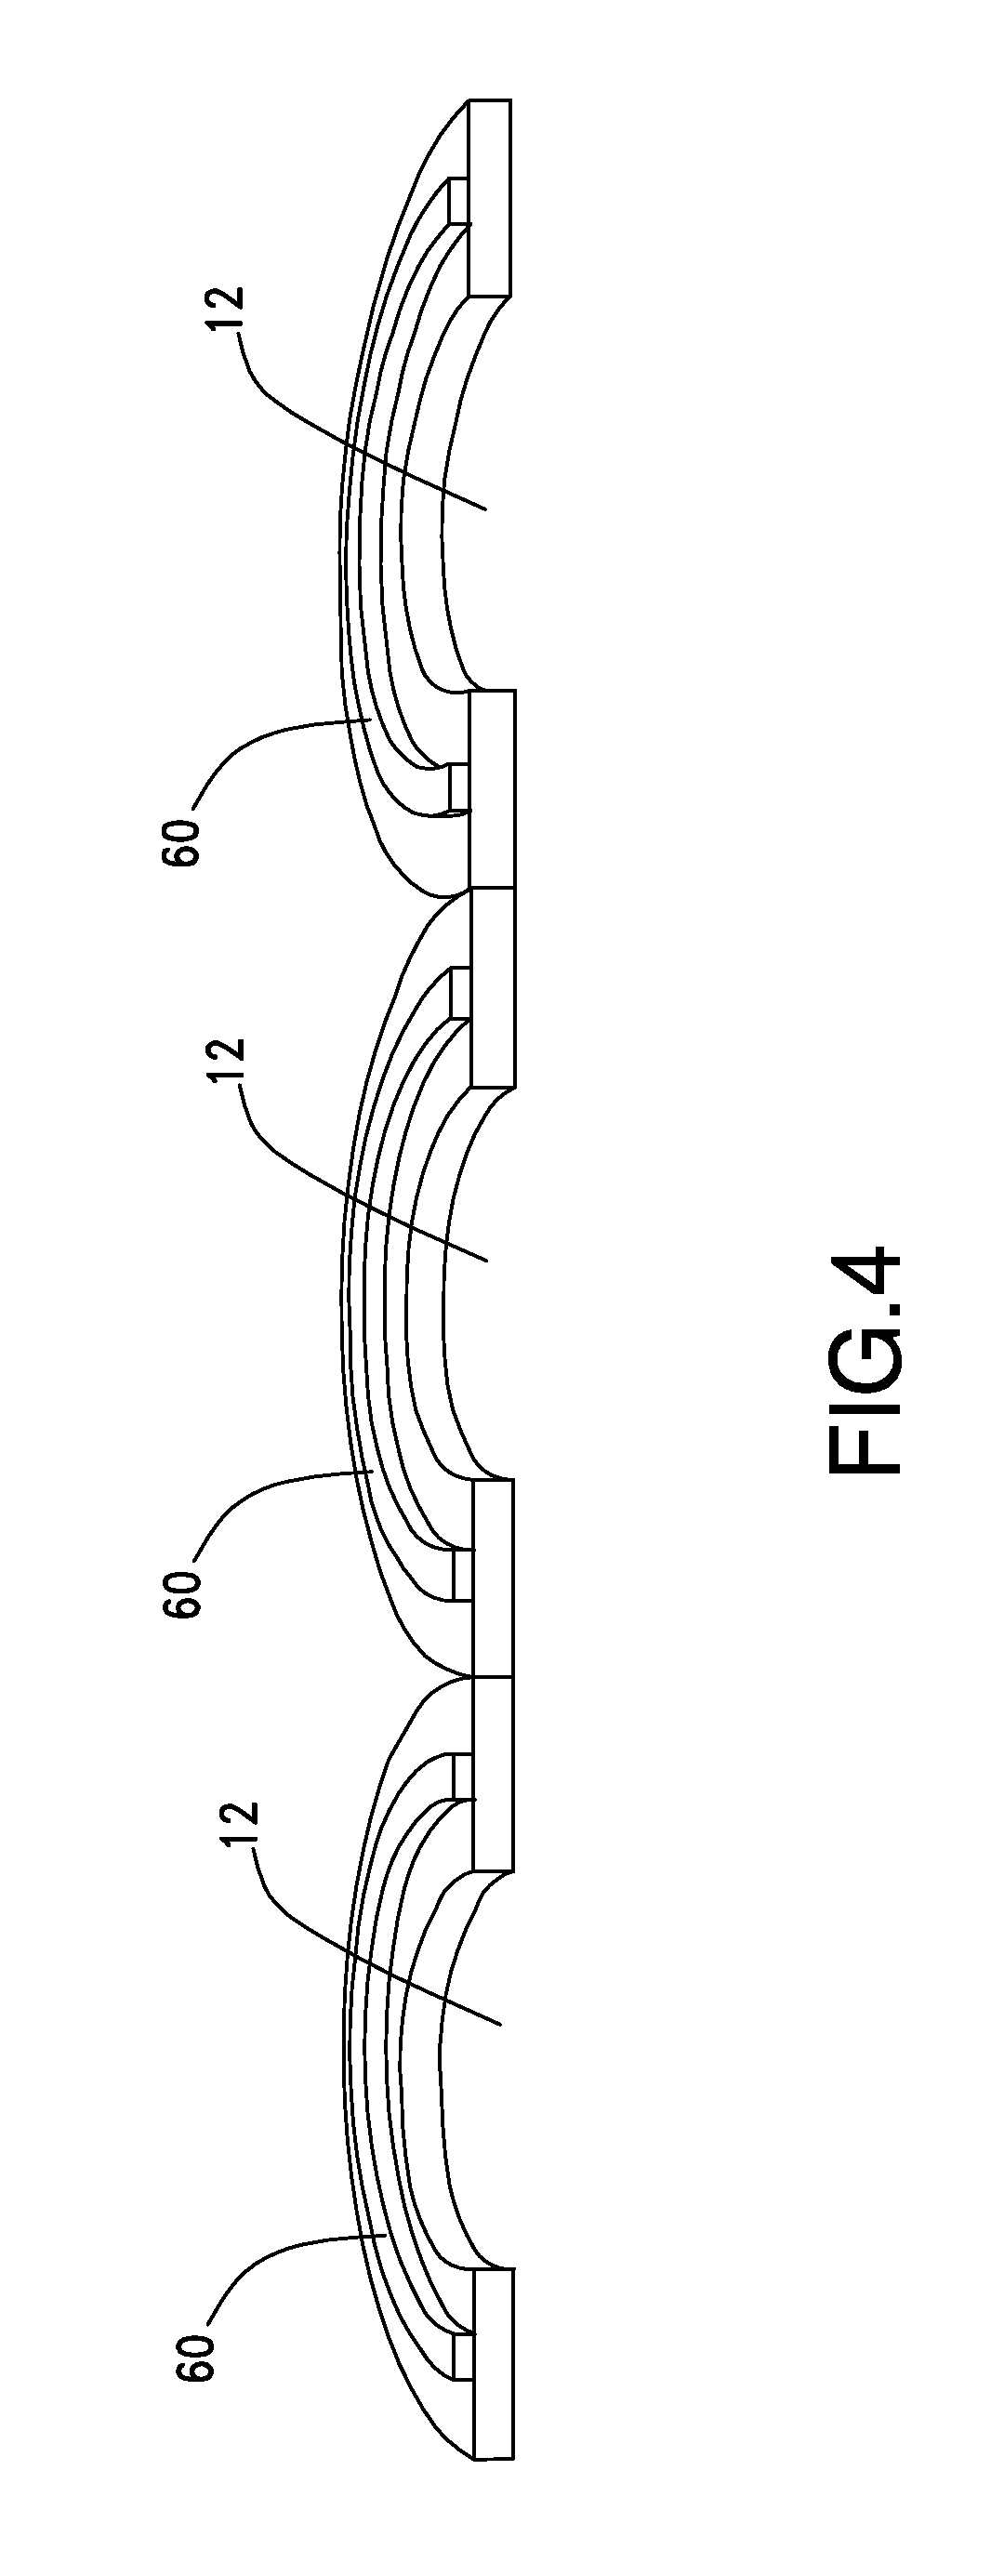 Heat Pipe, Method For Manufacturing A Heat Pipe, And A Circuit Board With A Heat Pipe Function